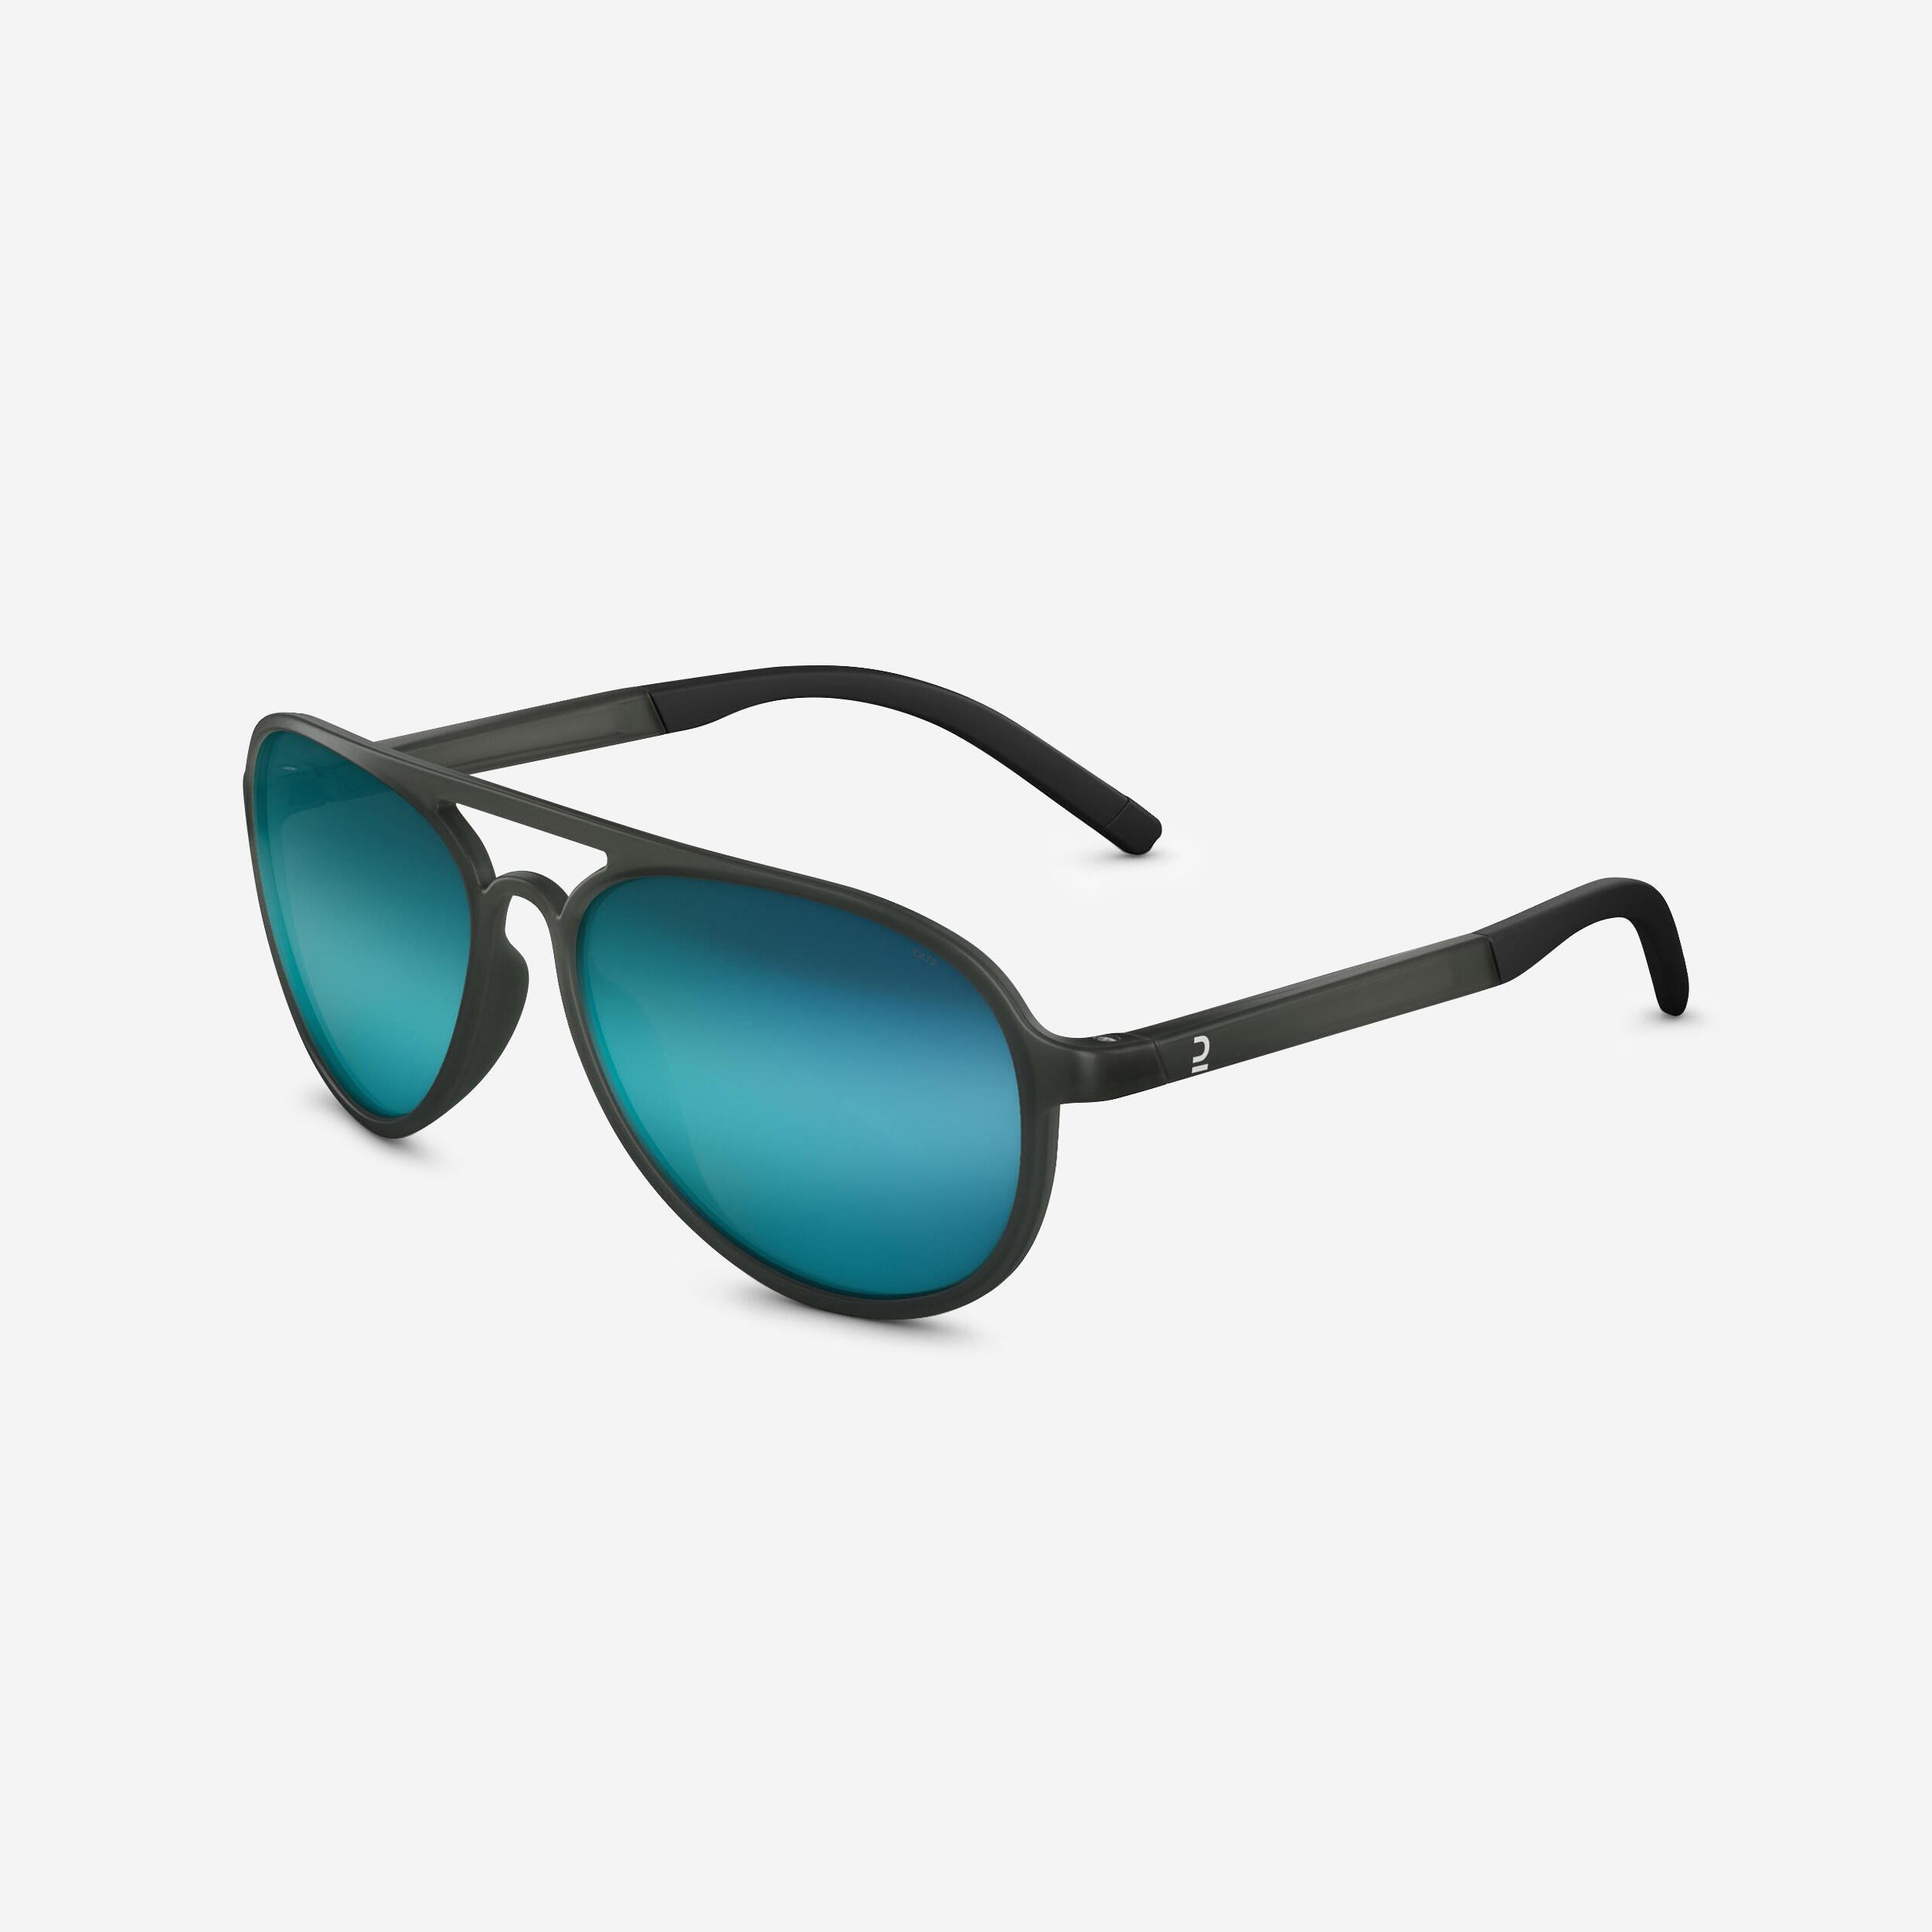 Hiking Sunglasses - MH120A - adult - category 3 blue - StoresRadar